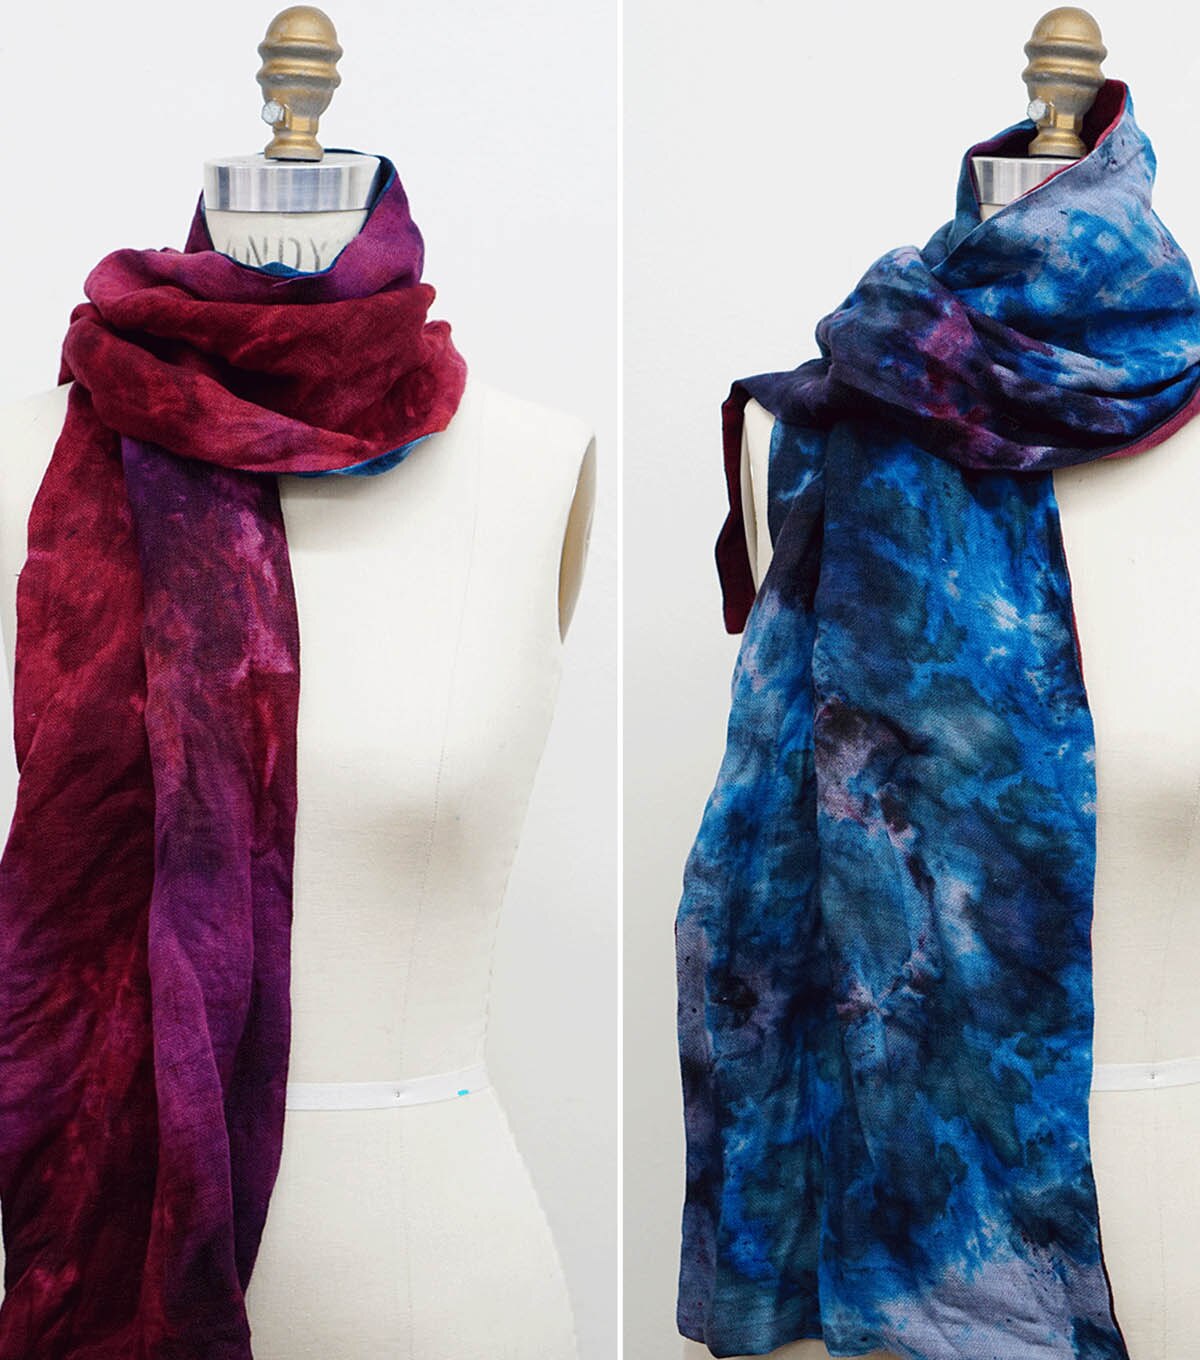 How To Make An Ice Dyed Scarf | JOANN